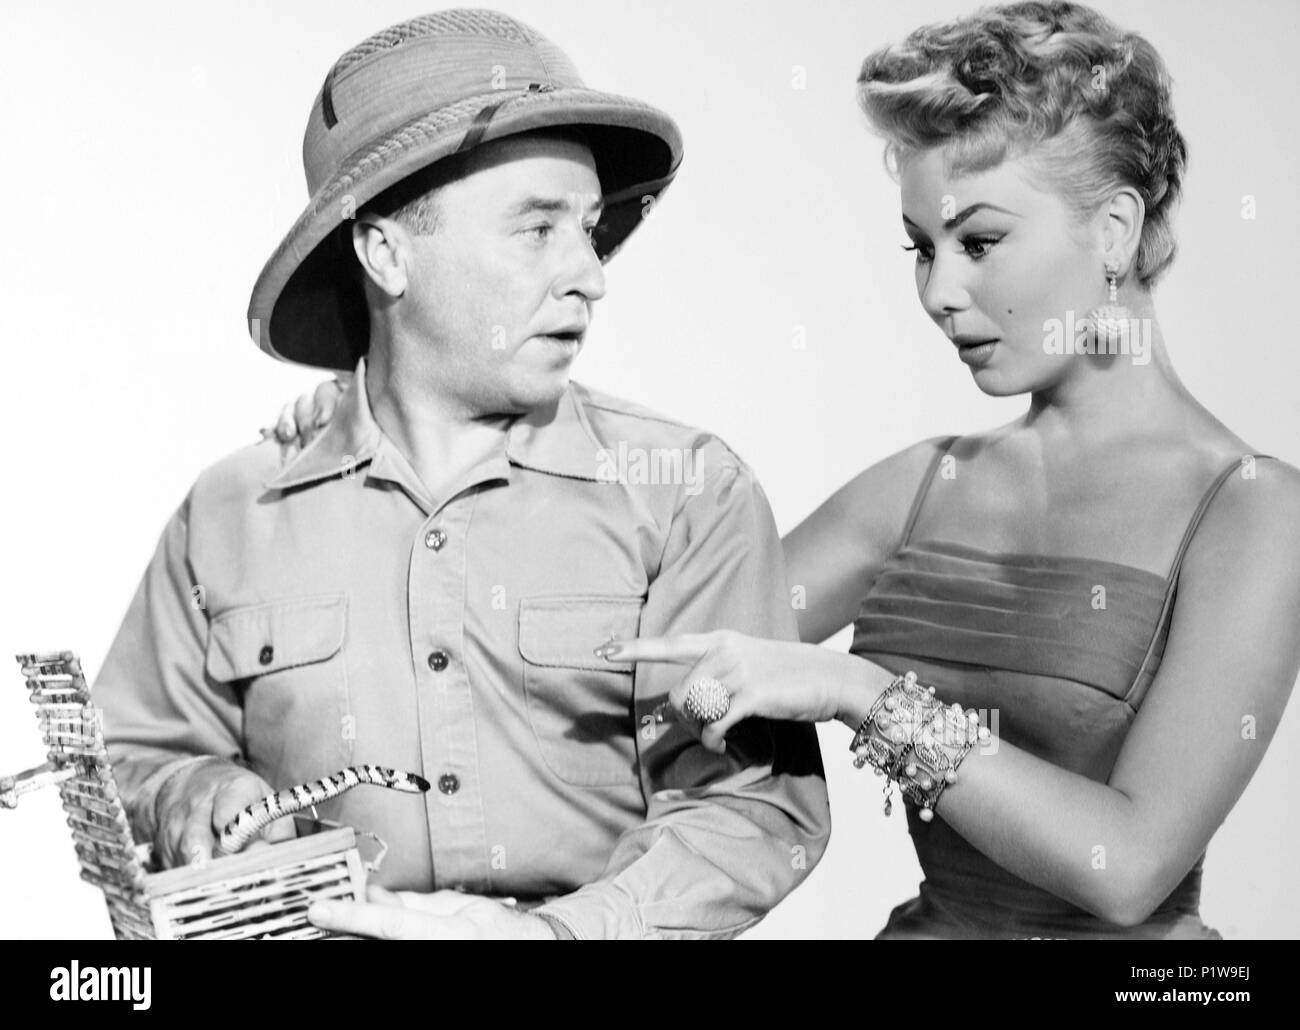 Original Film Title: THE BIRDS AND THE BEES.  English Title: THE BIRDS AND THE BEES.  Film Director: NORMAN TAUROG.  Year: 1956.  Stars: GEORGE GOBEL; MITZI GAYNOR. Credit: PARAMOUNT PICTURES / Album Stock Photo